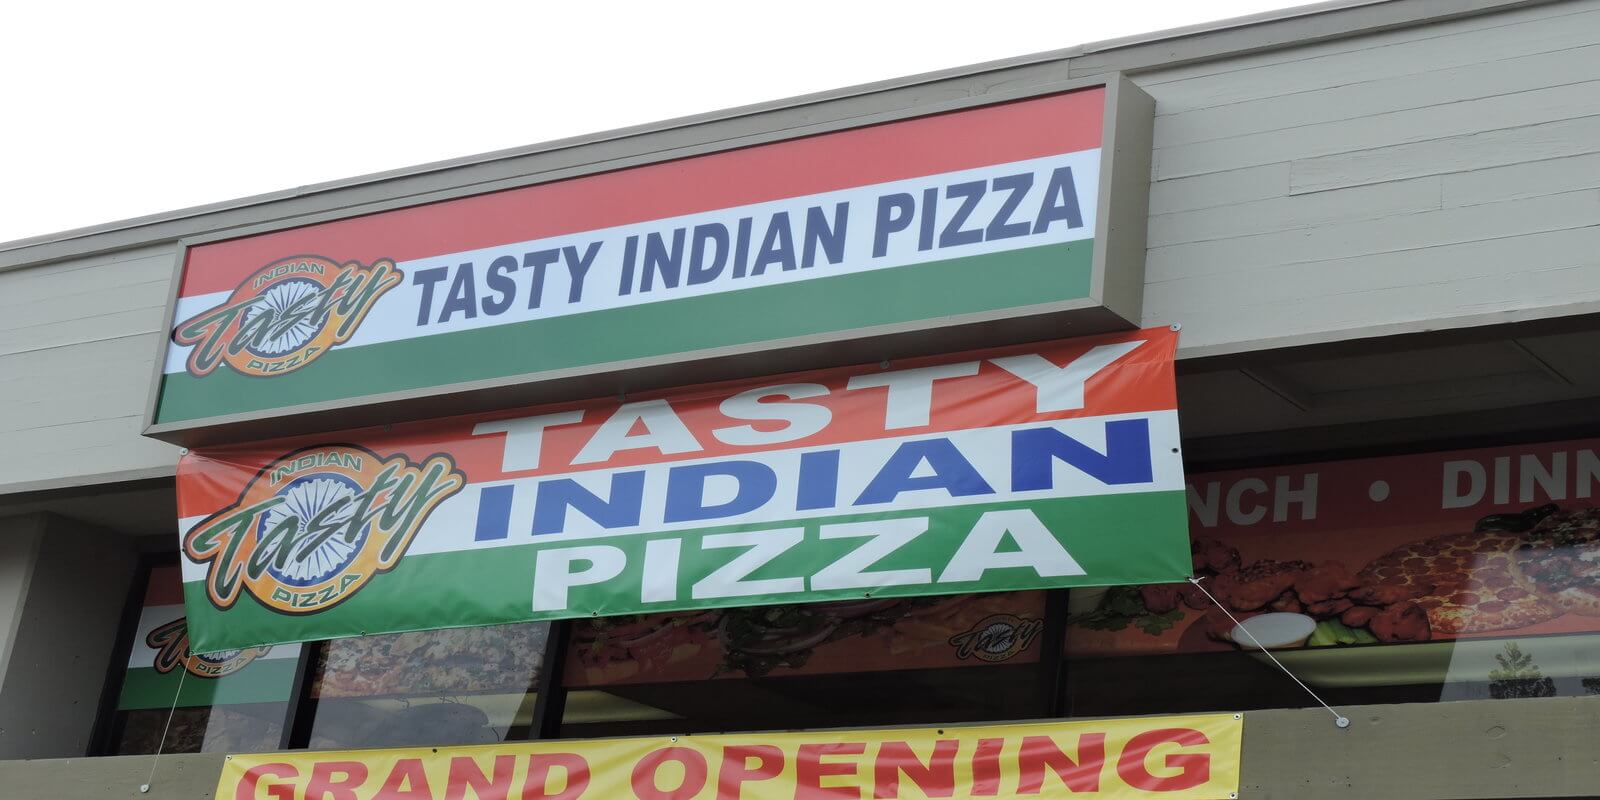 Image of Indian Star Pizza